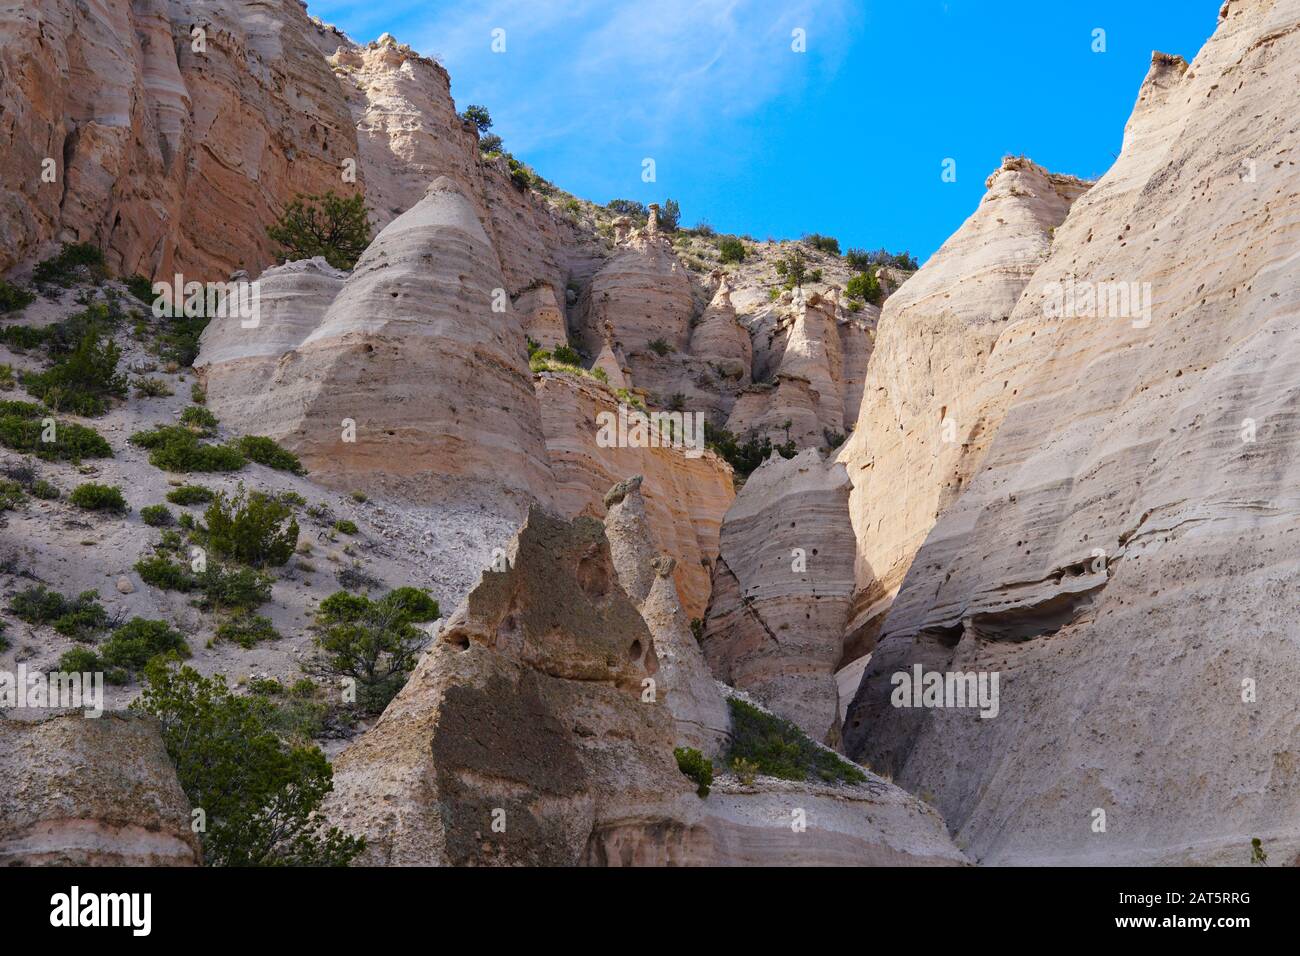 The unusual and beautiful sandstone cones and shapes of Tent Rocks National Monument. Stock Photo